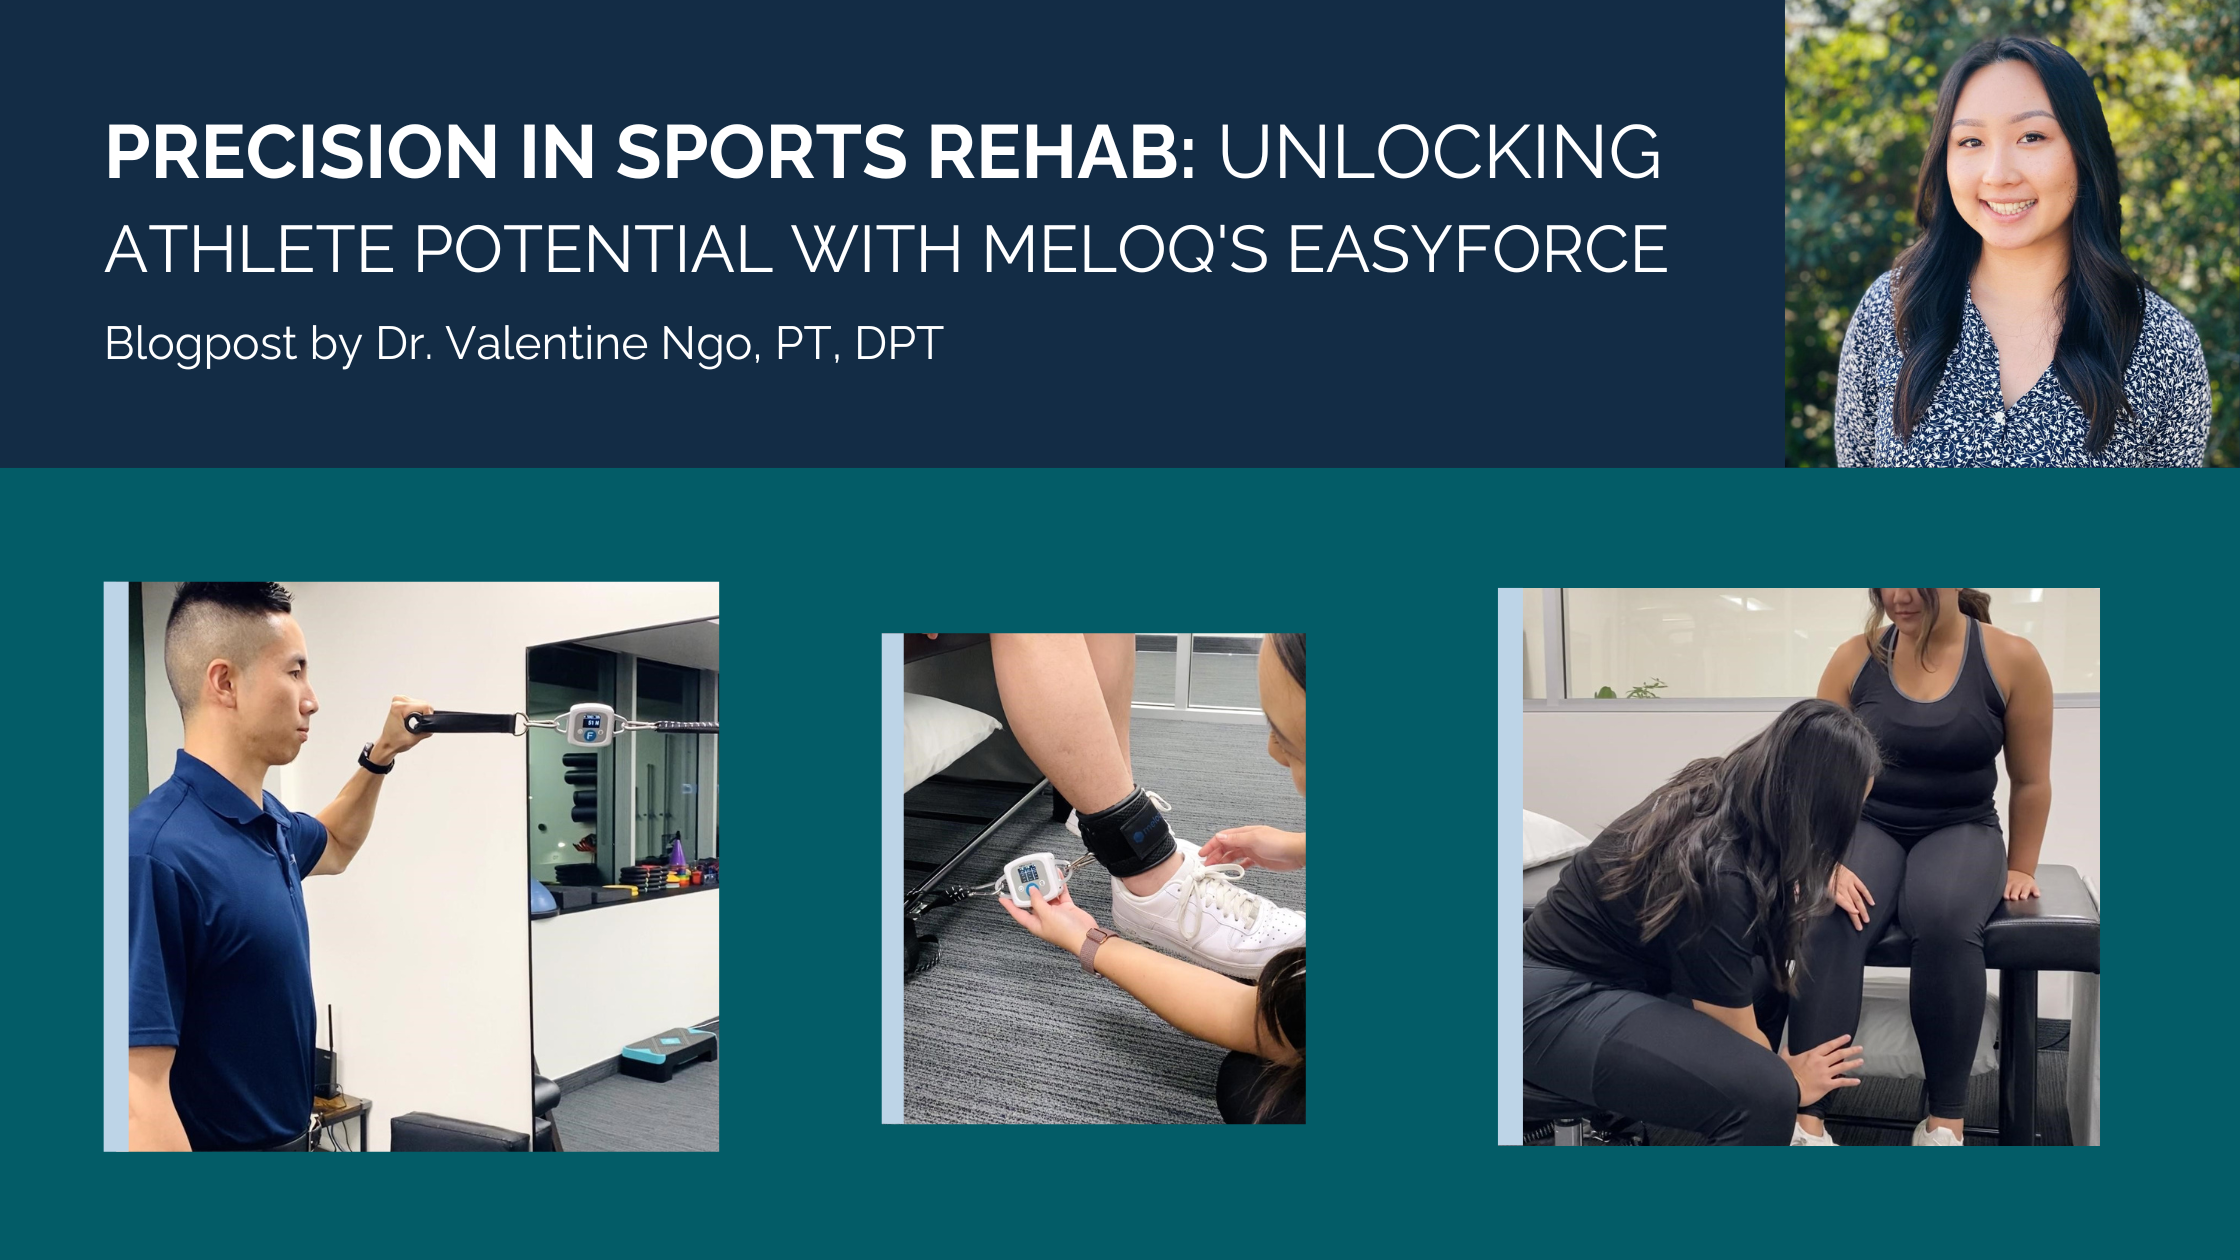 Precision in Sports Rehab: Unlocking Athlete Potential with Meloq's EasyForce